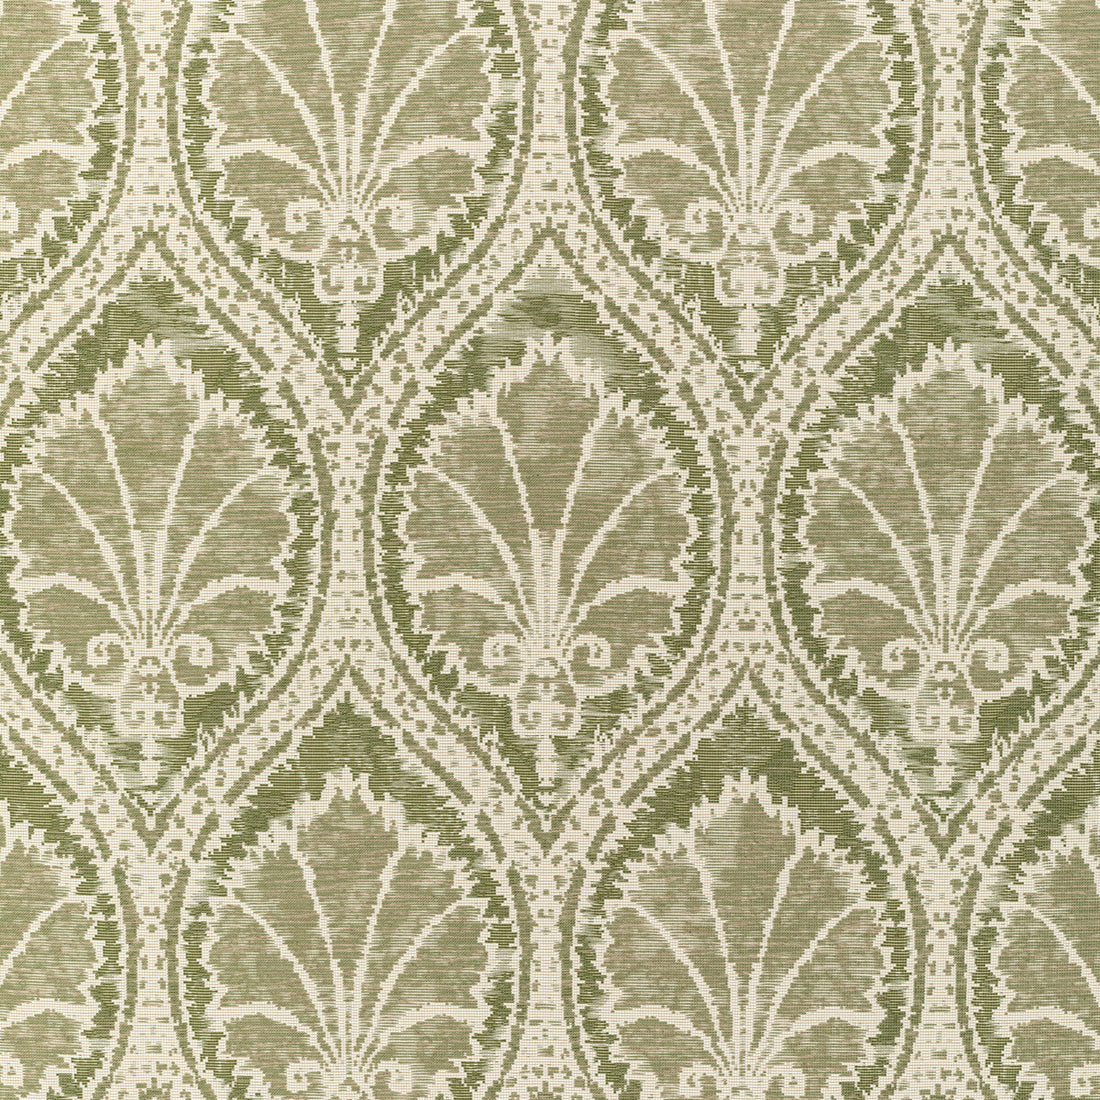 Seville Weave fabric in celadon/moss color - pattern 2021108.330.0 - by Lee Jofa in the Triana Weaves collection